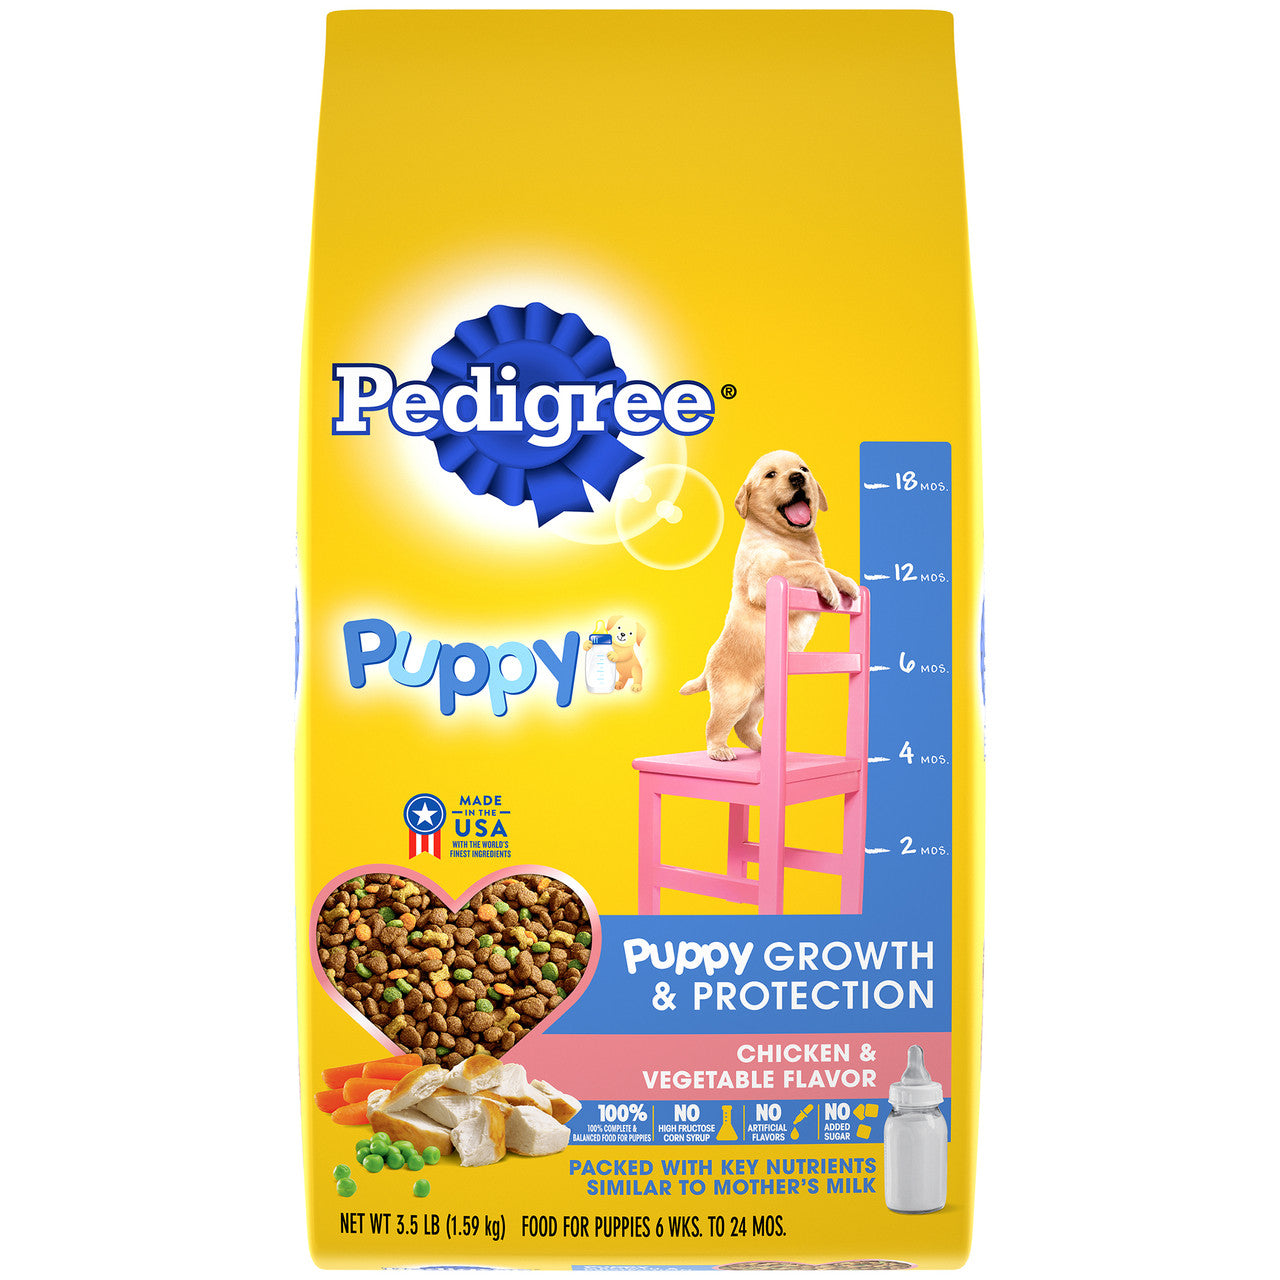 Pedigree Puppy Growth & Protection Dry Dog Food Chicken & Vegetable 3.5lb